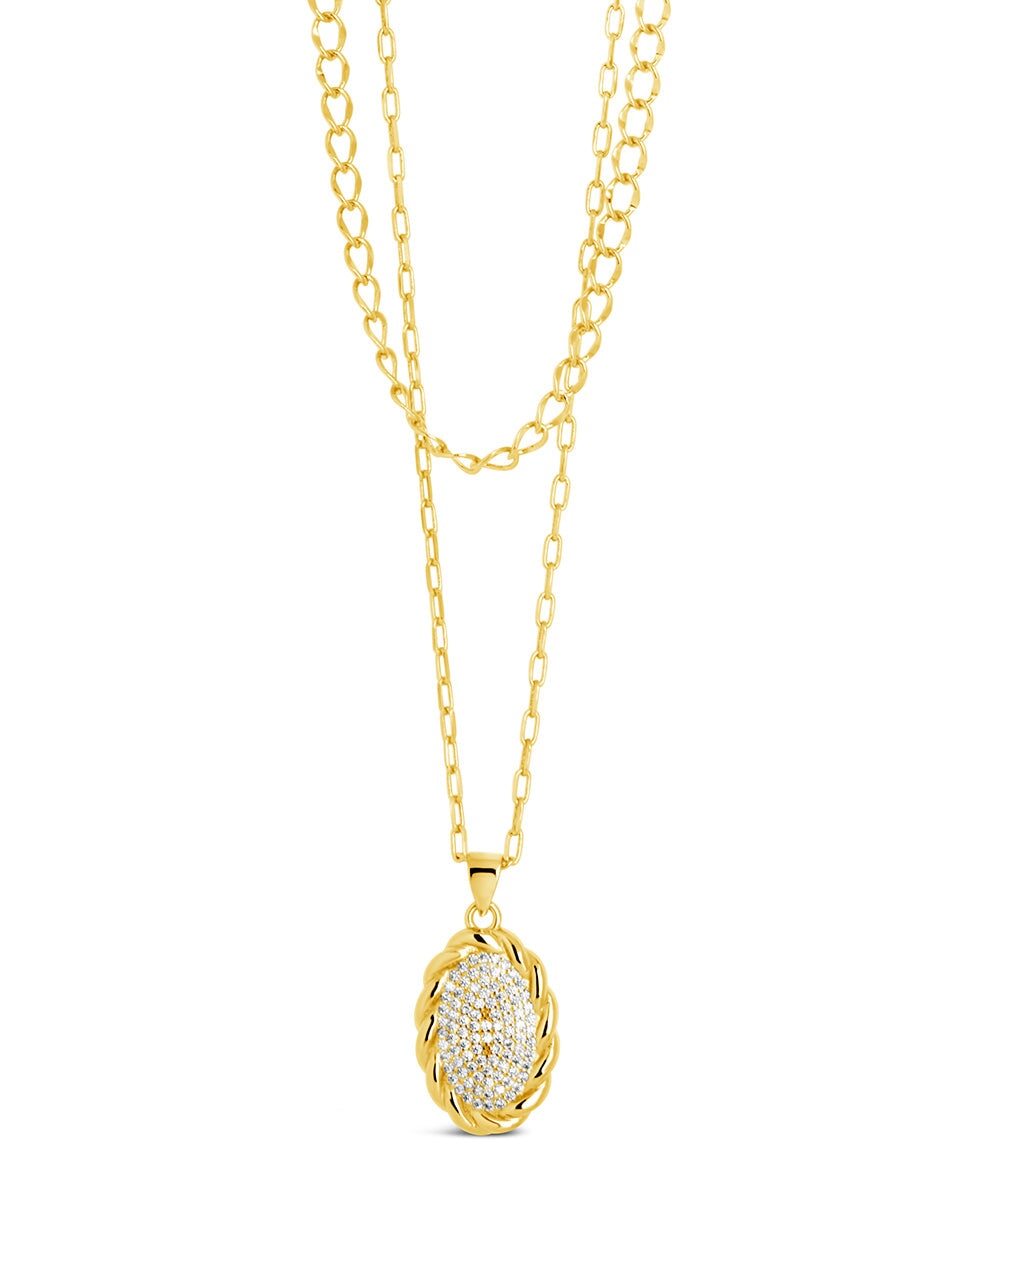 Galette Layered Necklace Necklace Sterling Forever Gold 